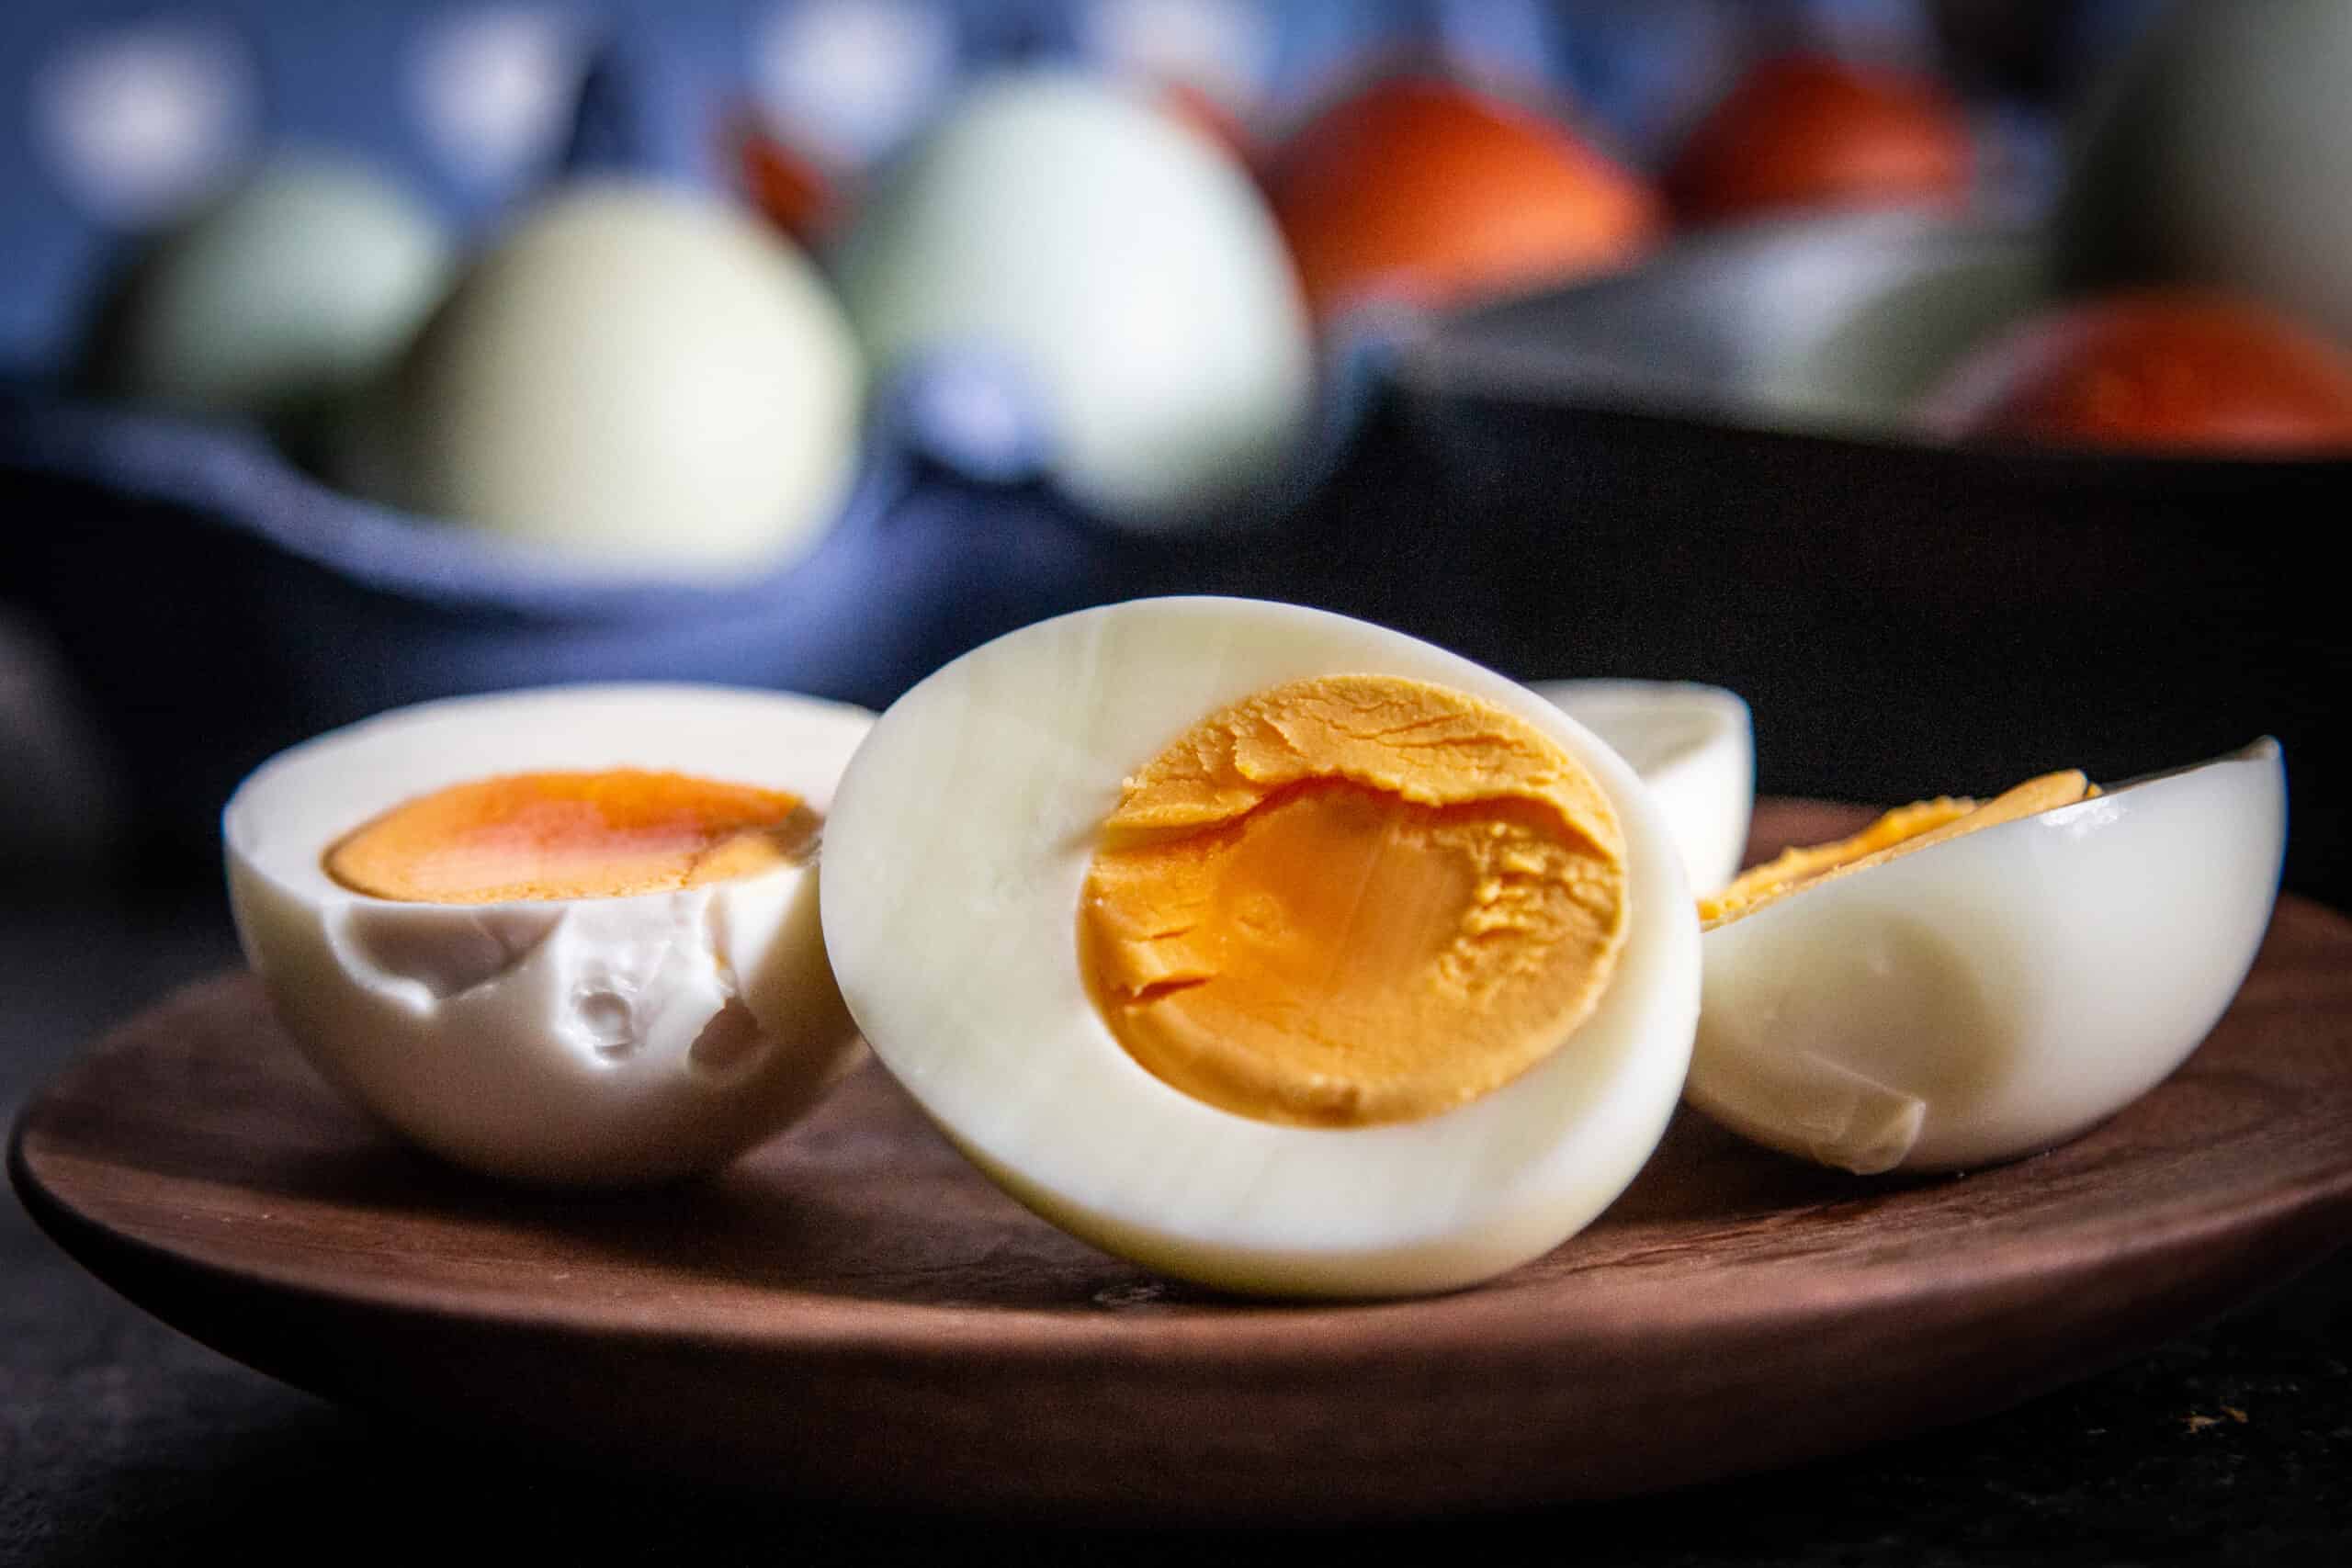 Hard-boiled eggs cut in half on a wooden plate